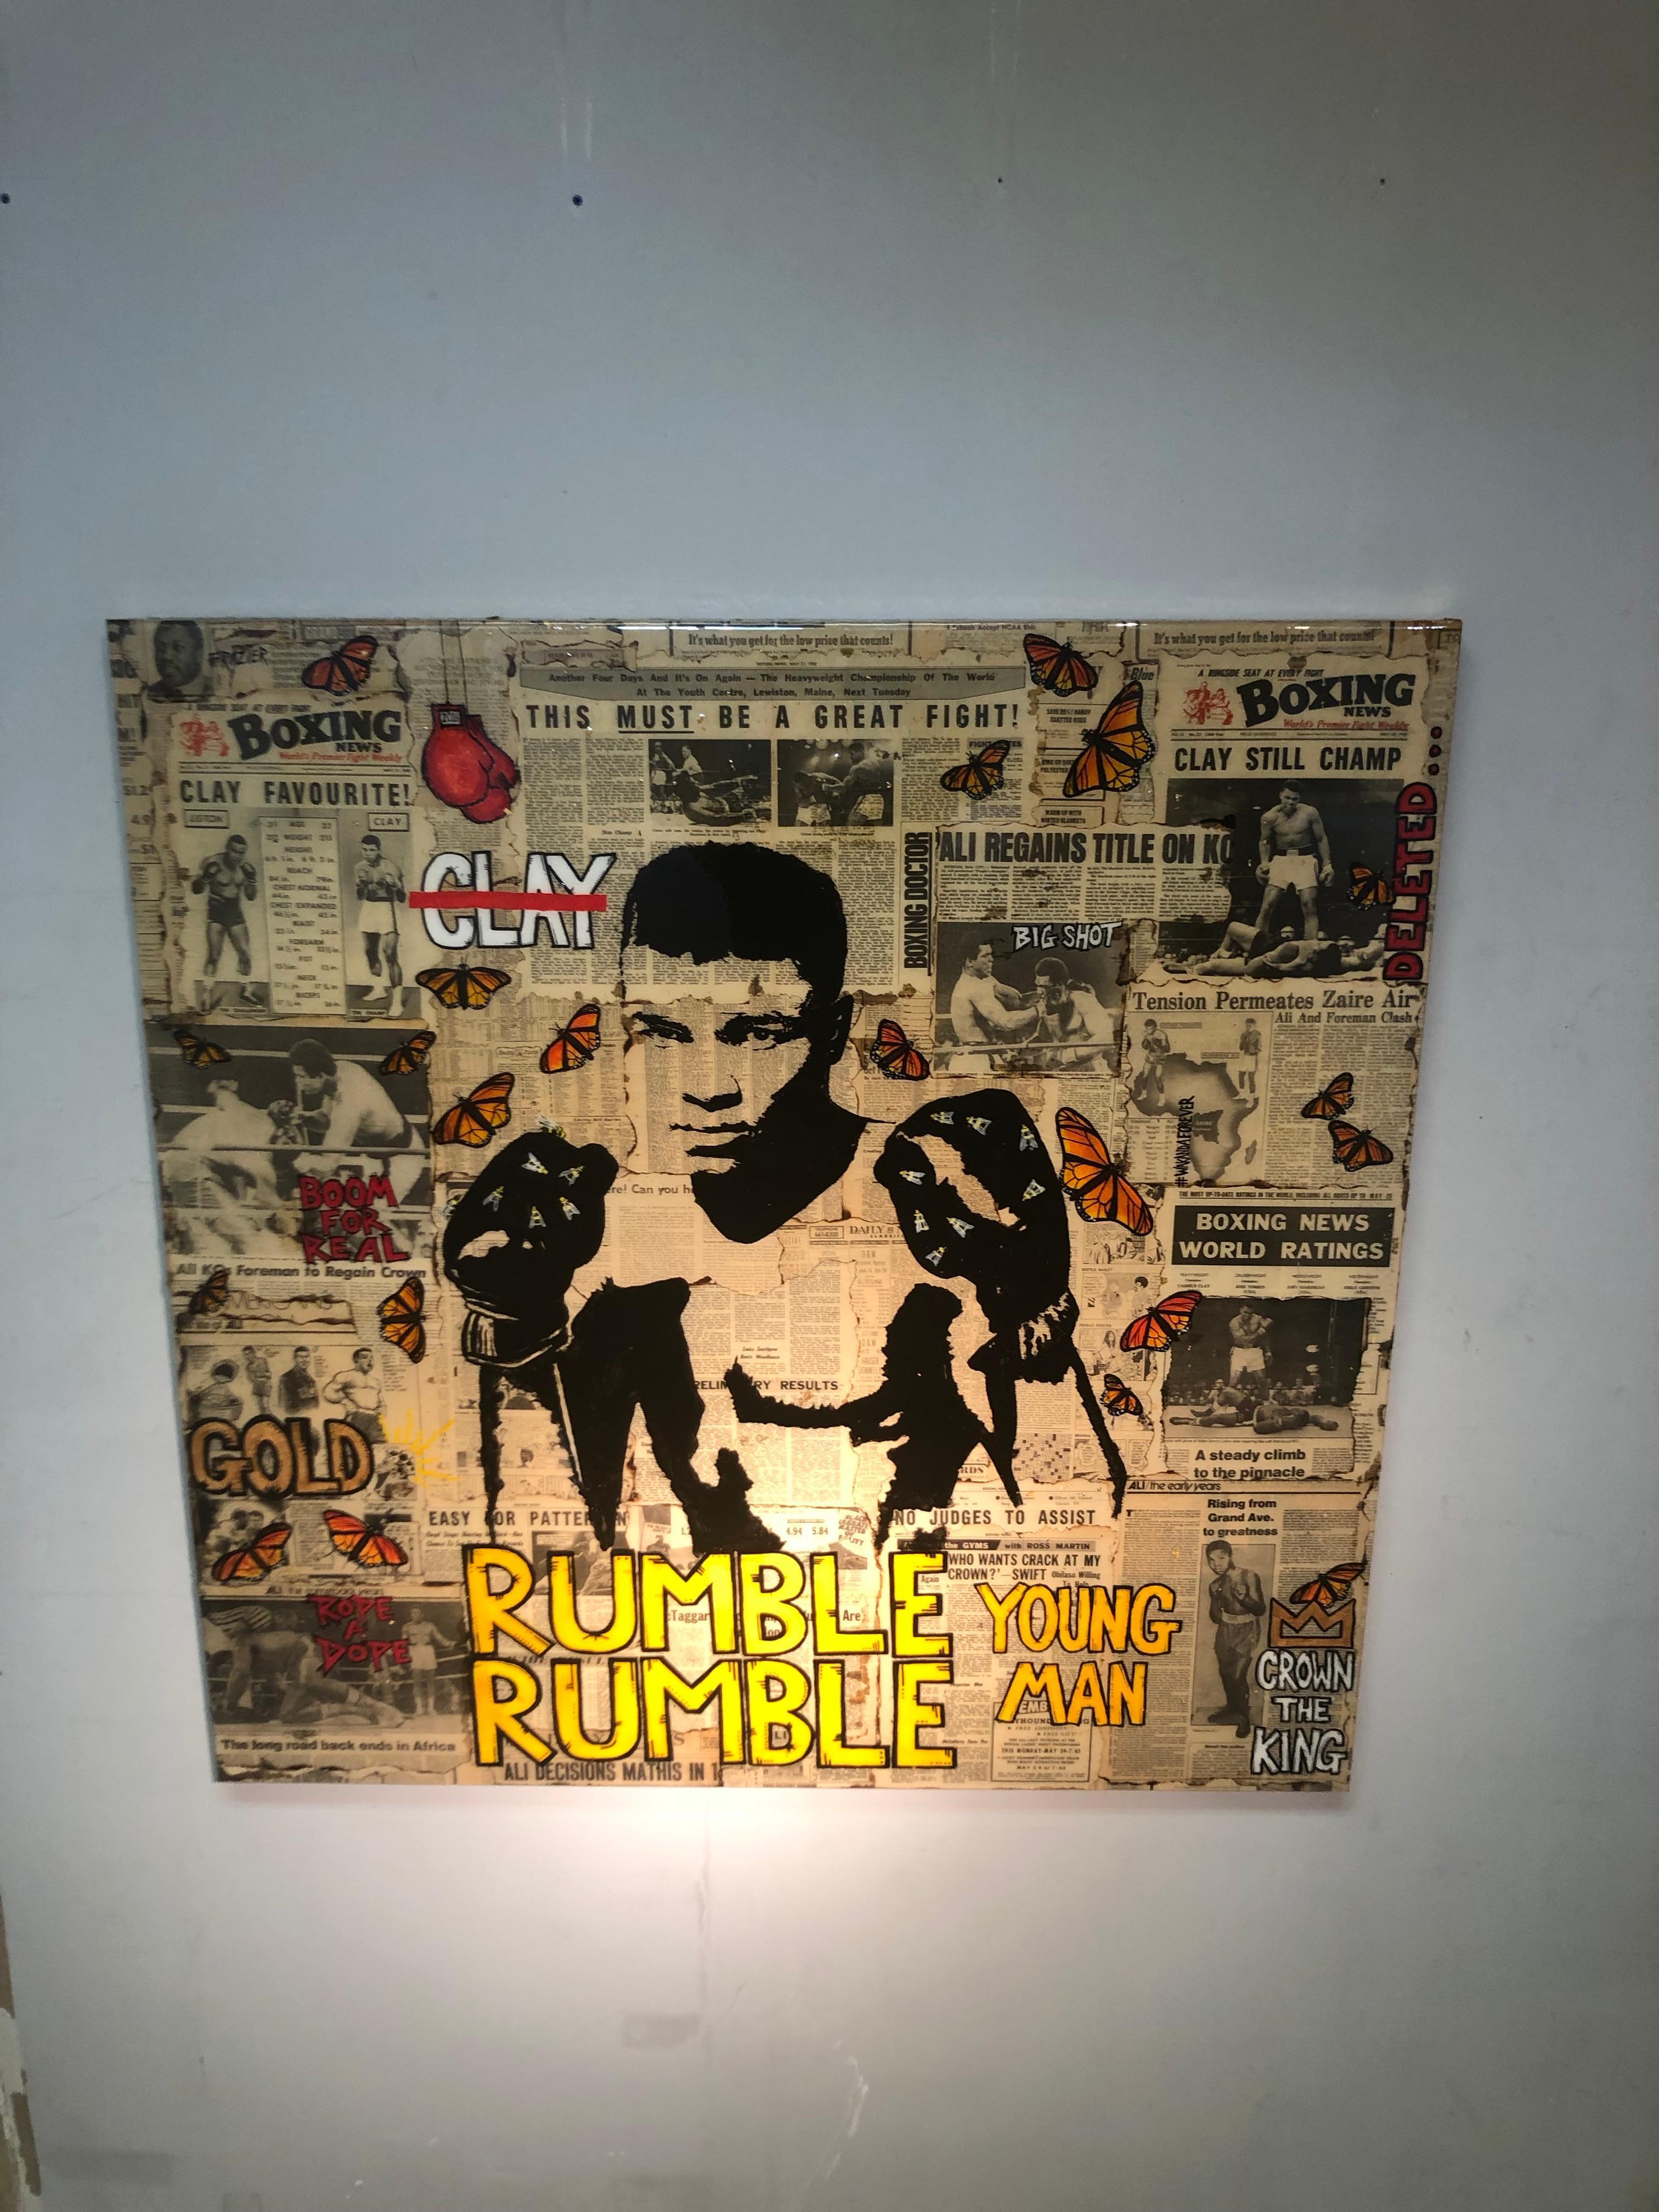 Rumble Young Man - Muhammad Ali, Pop Art Photo Collage with Vintage Newsprint - Photograph by Patrick Burns